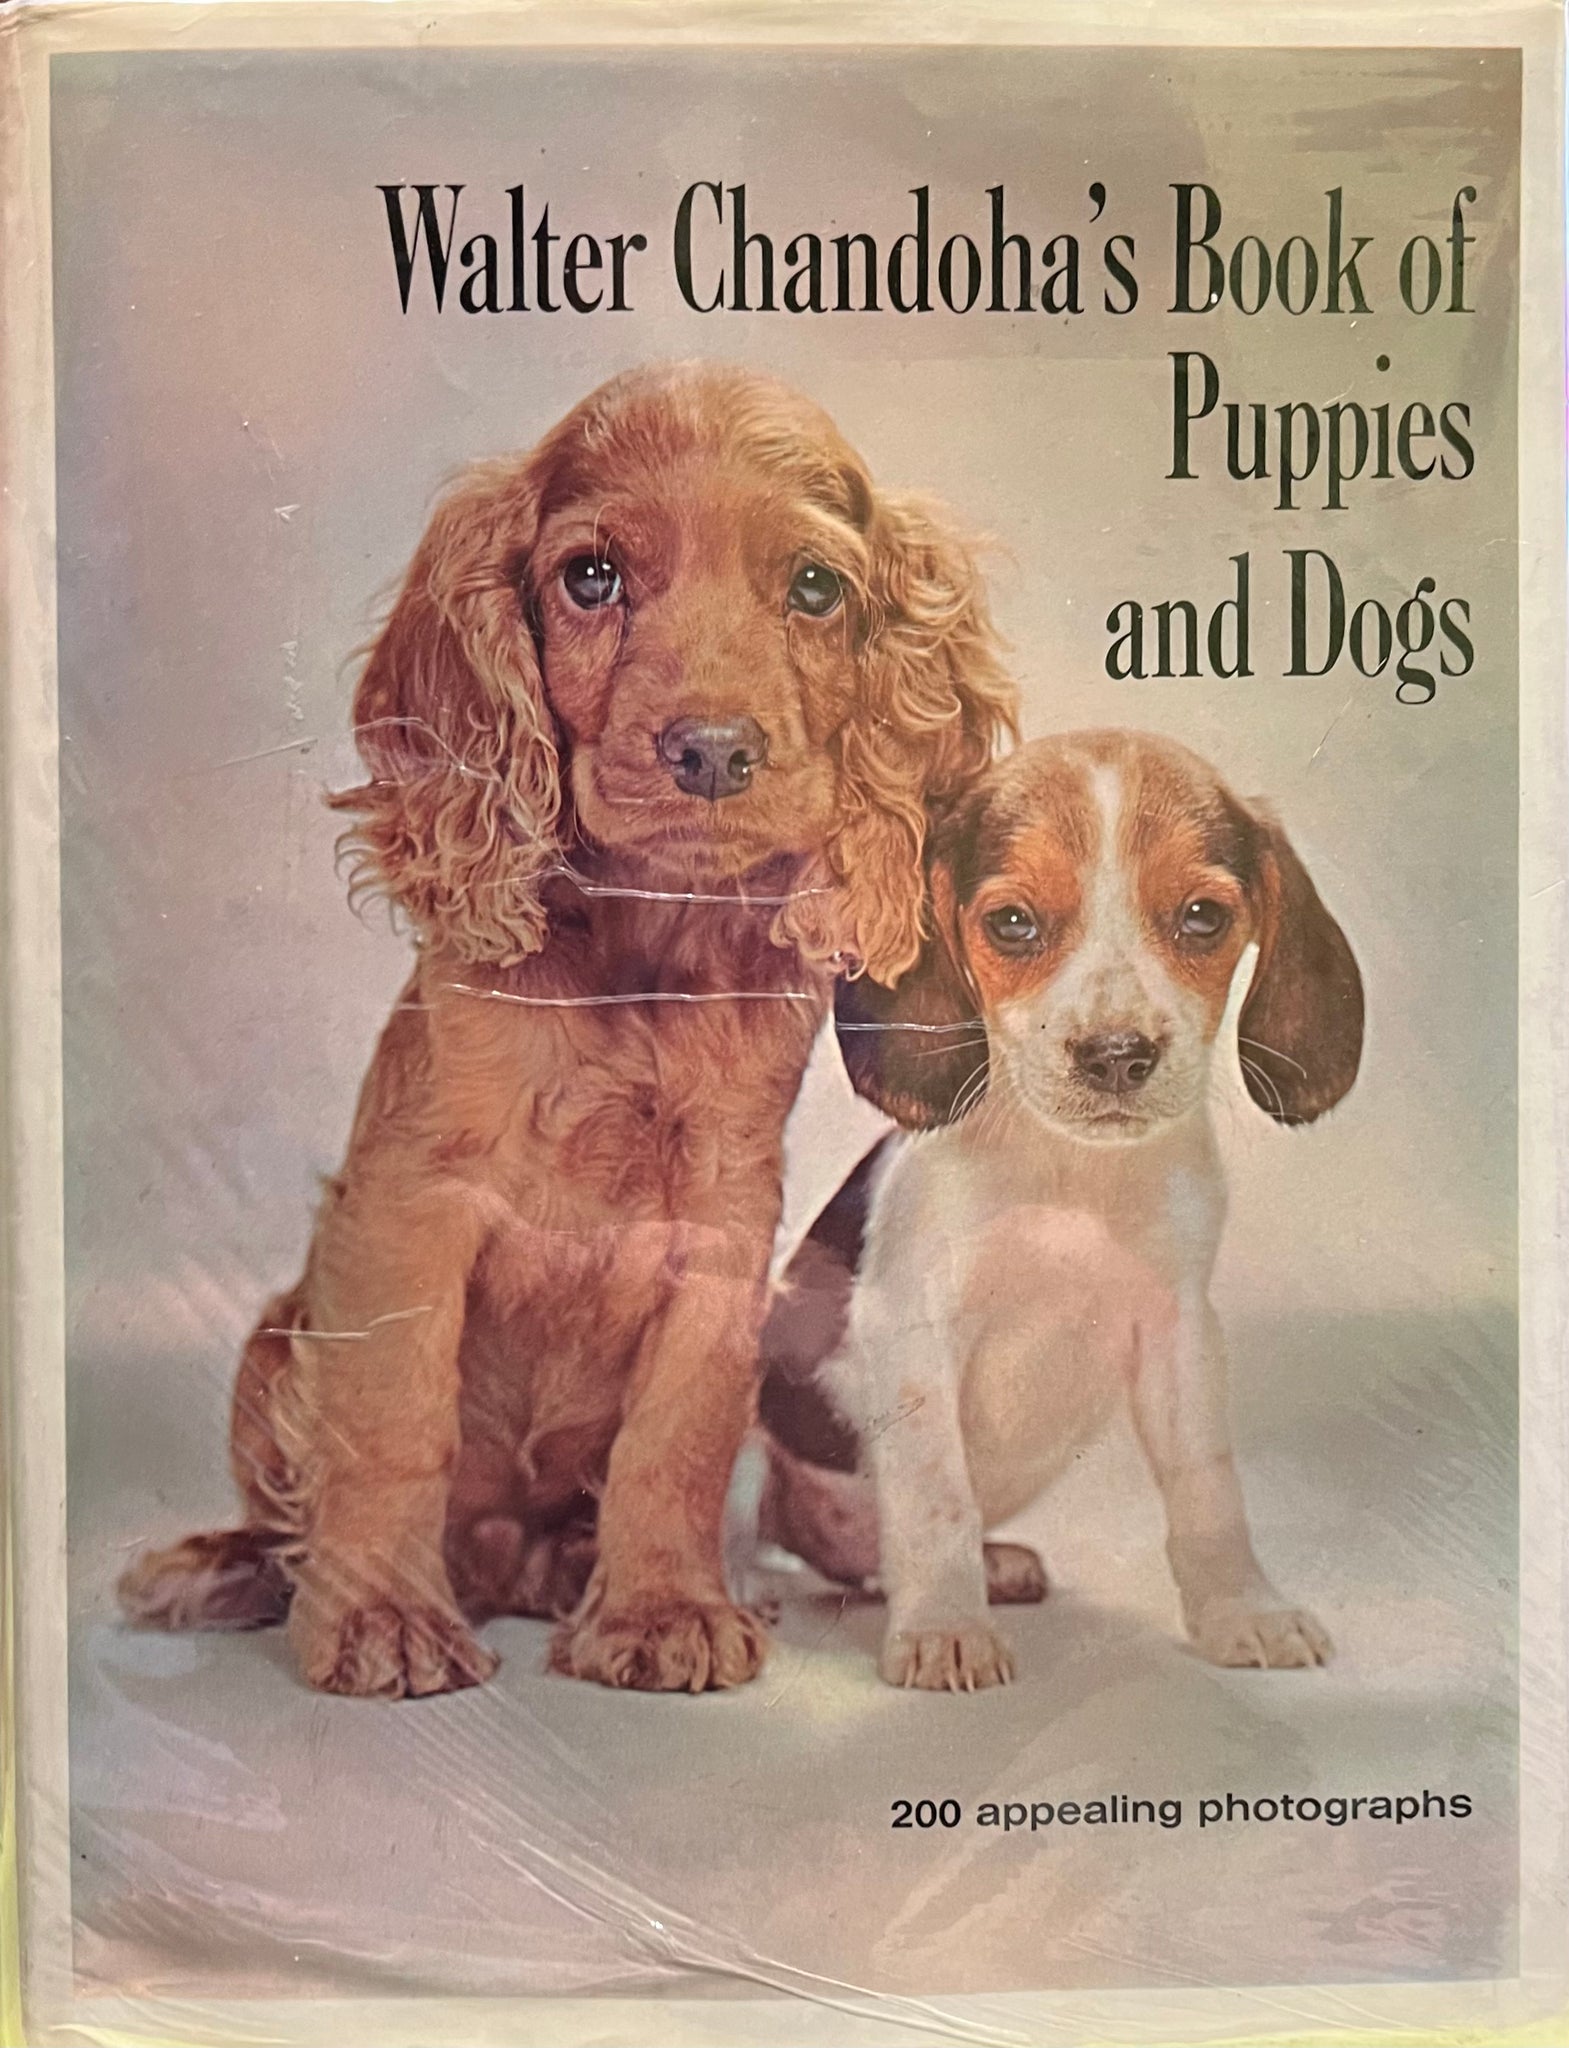 Walter Chandoha’s Book of Puppies and Dogs